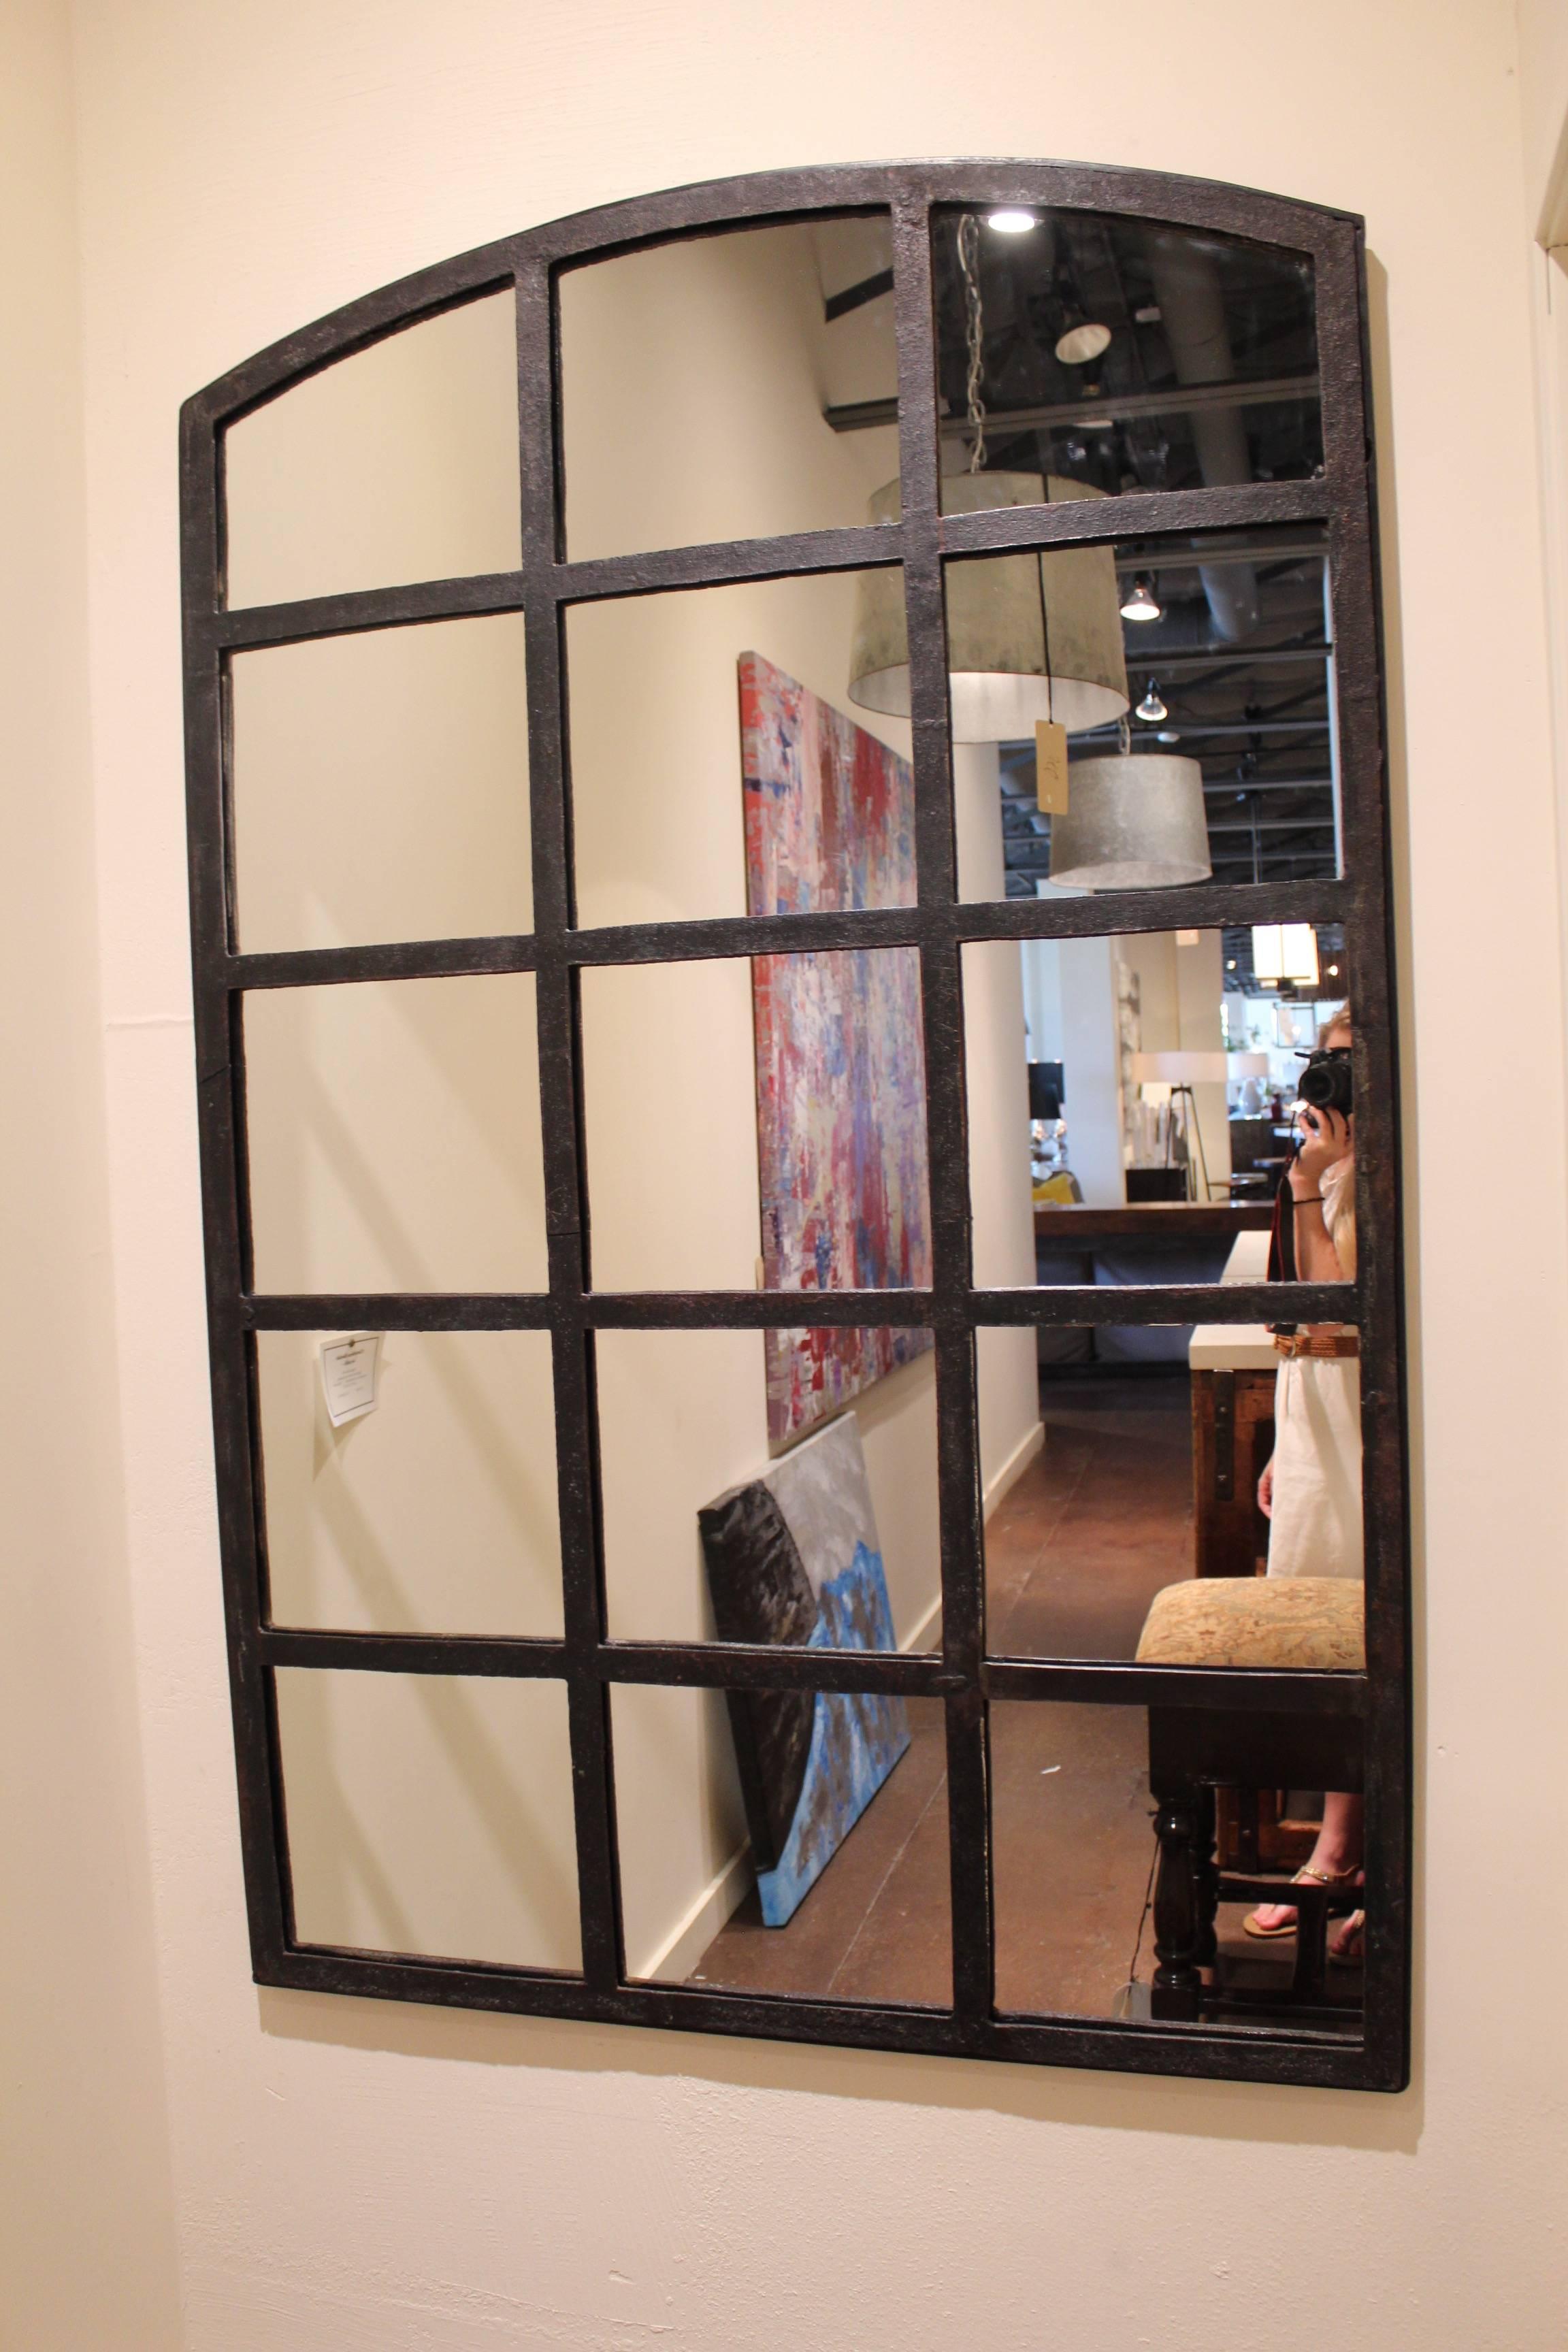 Industrial iron arch window frame mirror.
15 window frame with mirrored glass.
Cast iron patinated natural black patina.
Can be placed indoor or outdoor mirror.

Origin: English warehouse window frame, 1930.